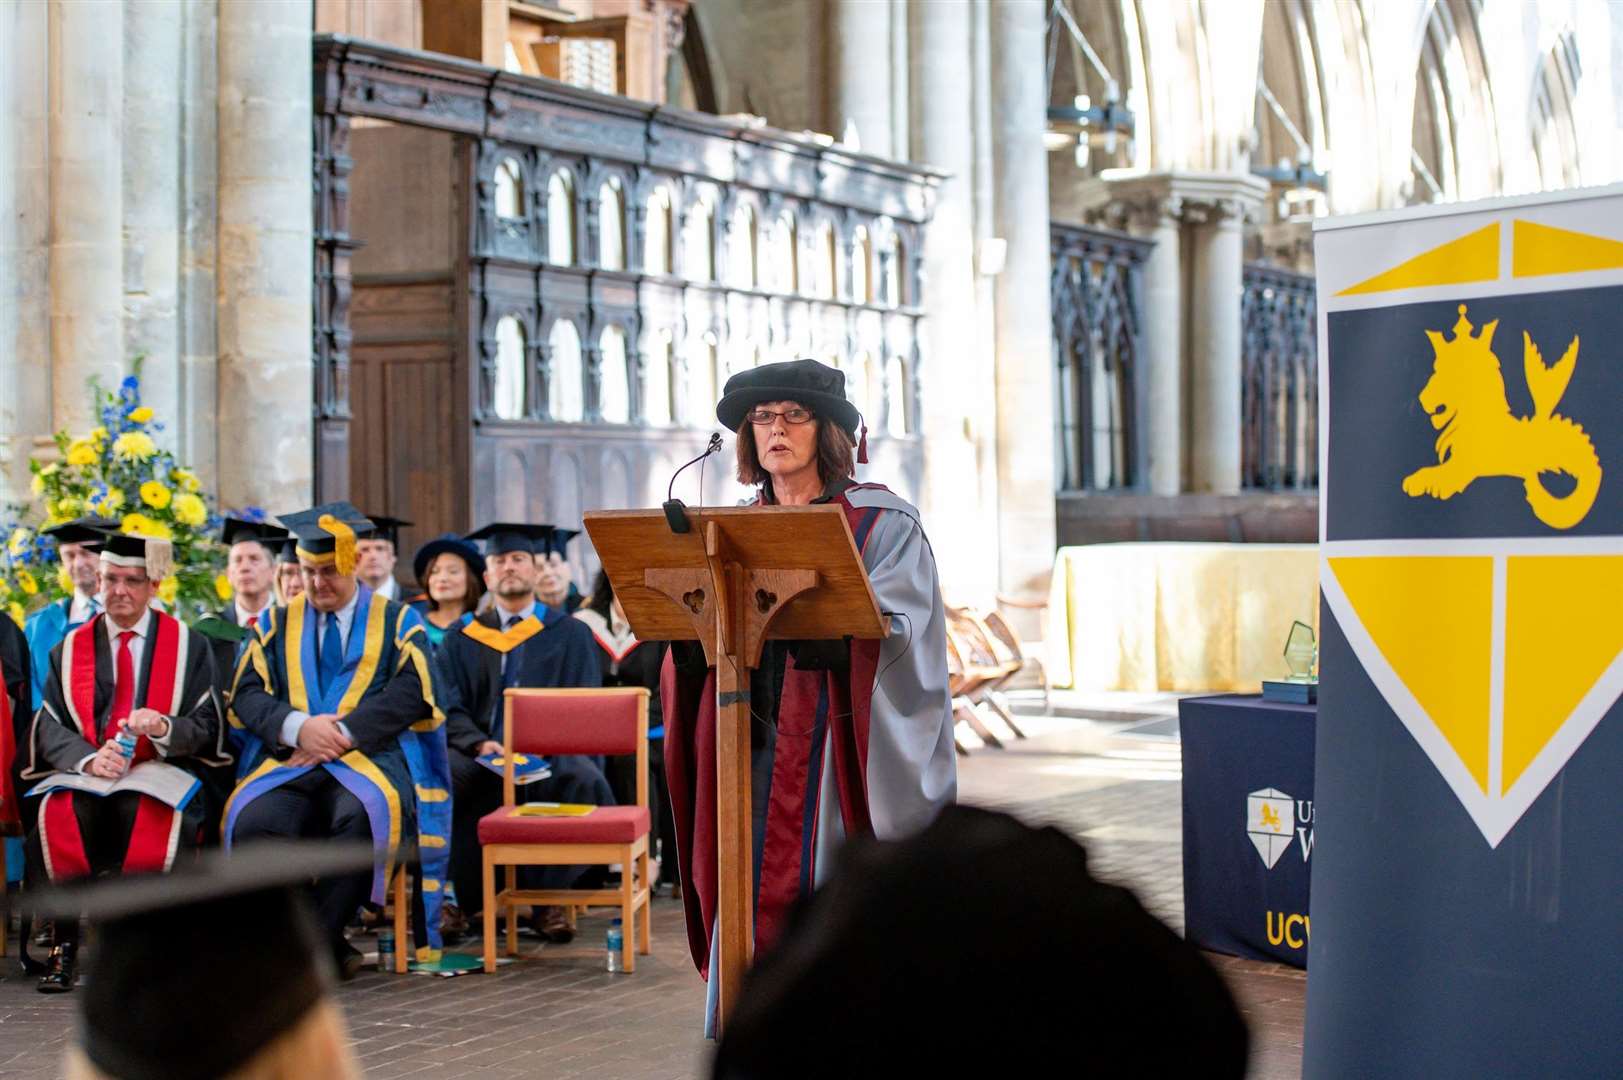 Dr Lynn Senior, director at The Education and Training Consortium at the University of Huddersfield, delivering a keynote speech at the UcWA graduation